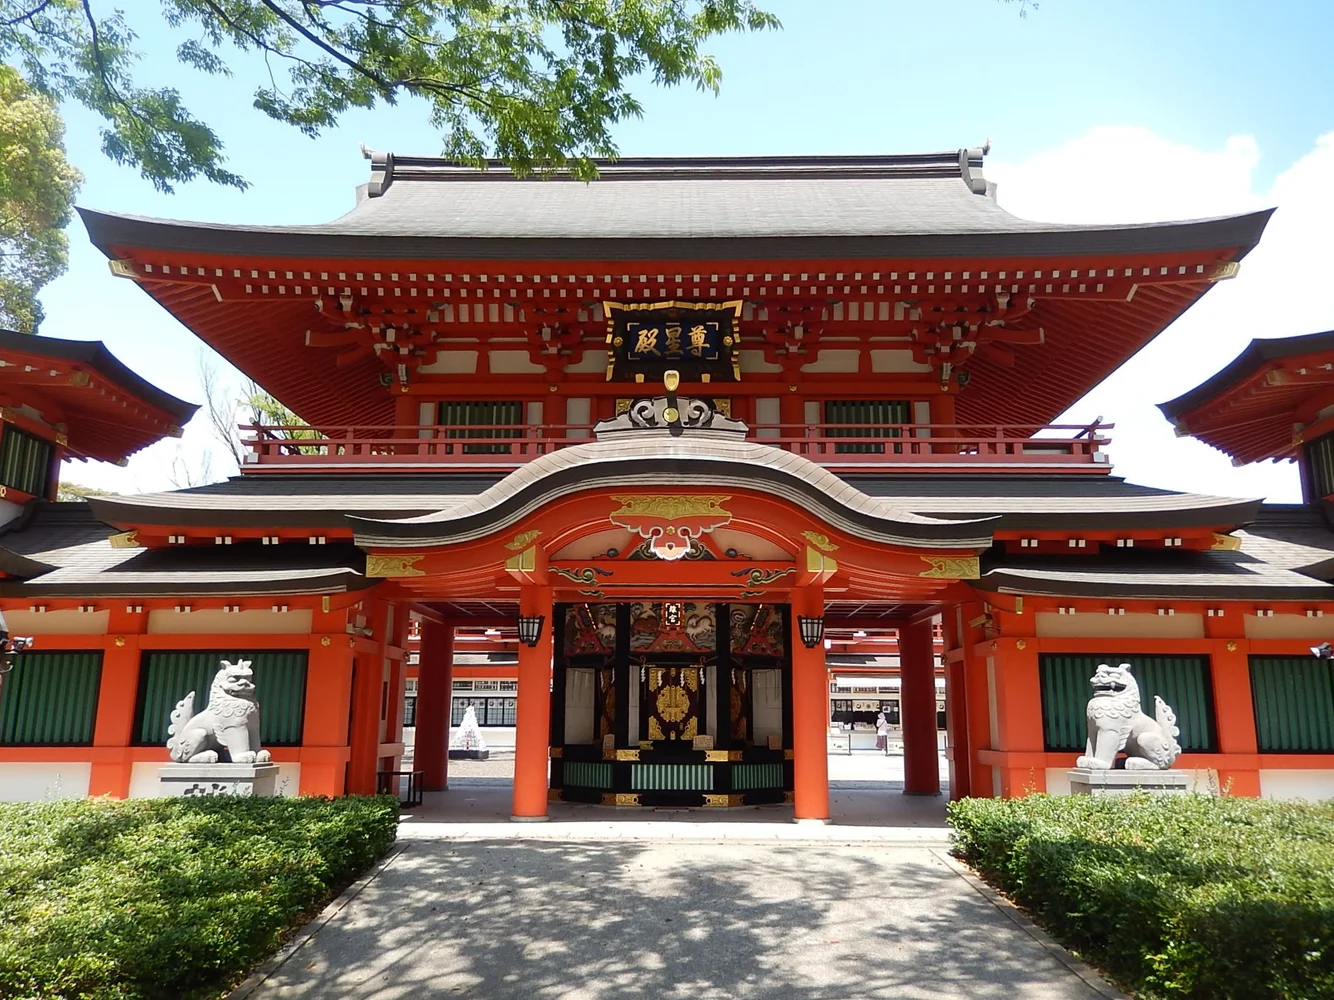 See the Chiba Castle and Chiba Shrine on a guided tour!